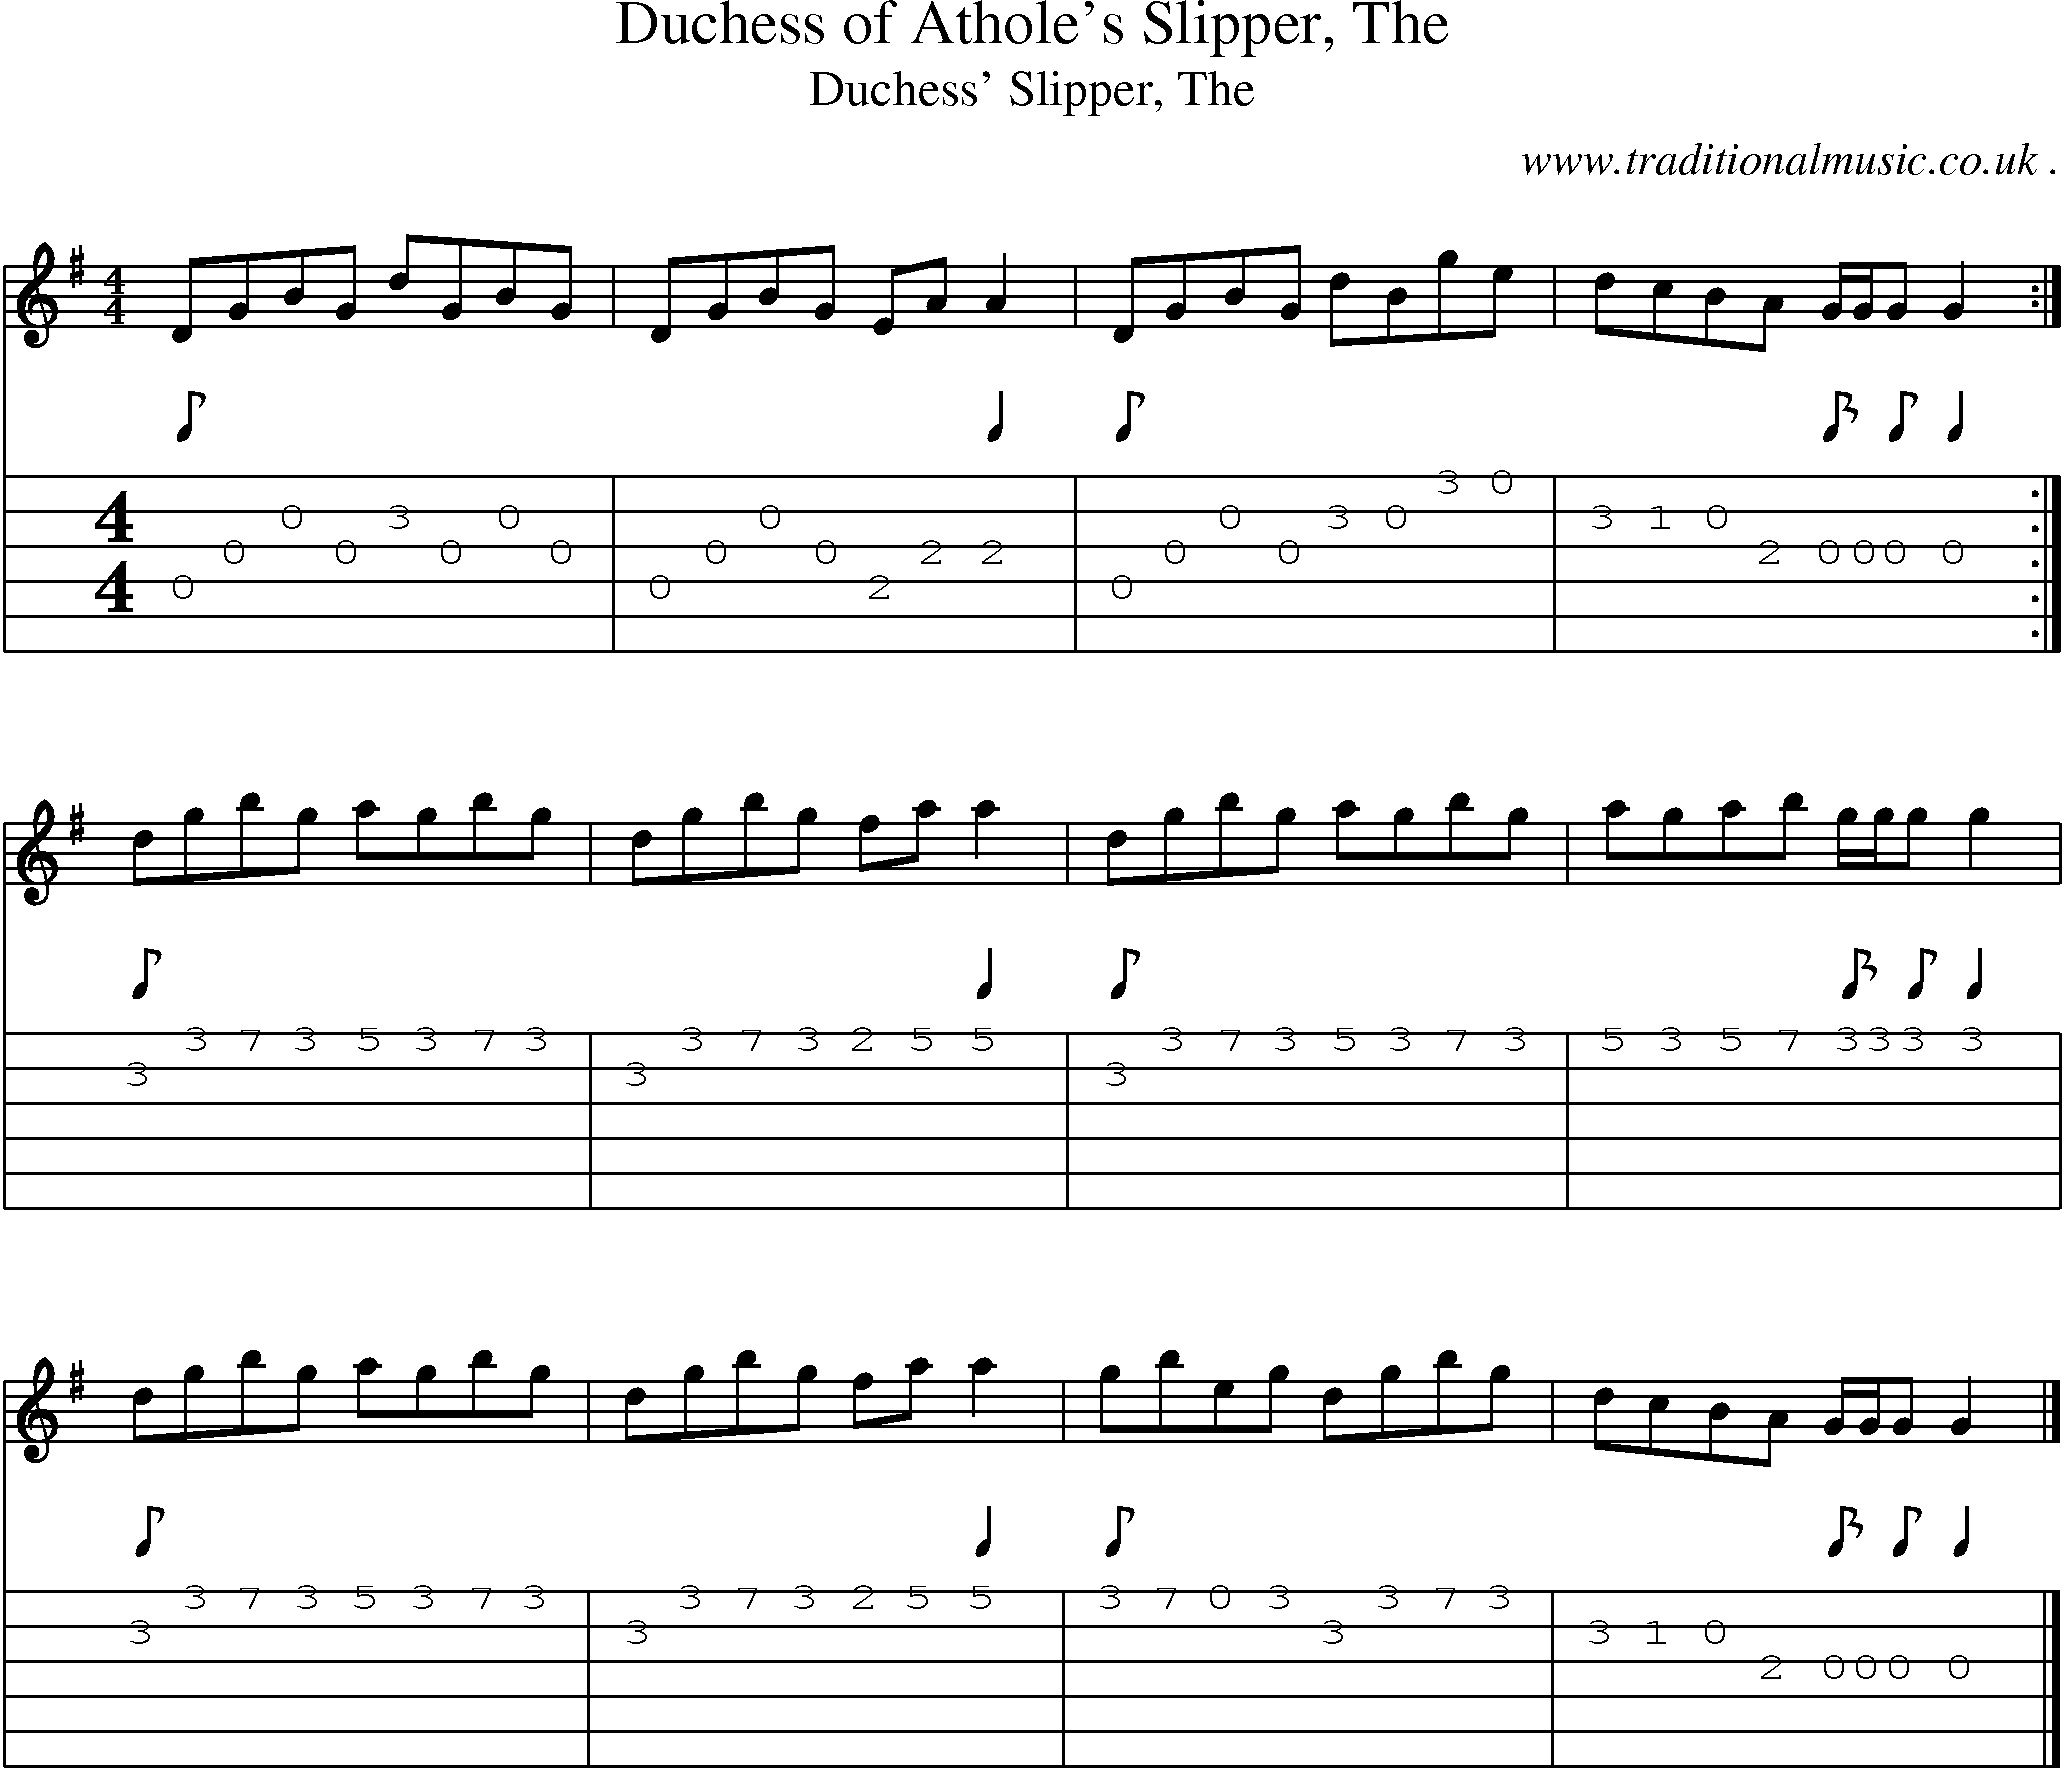 Sheet-music  score, Chords and Guitar Tabs for Duchess Of Atholes Slipper The